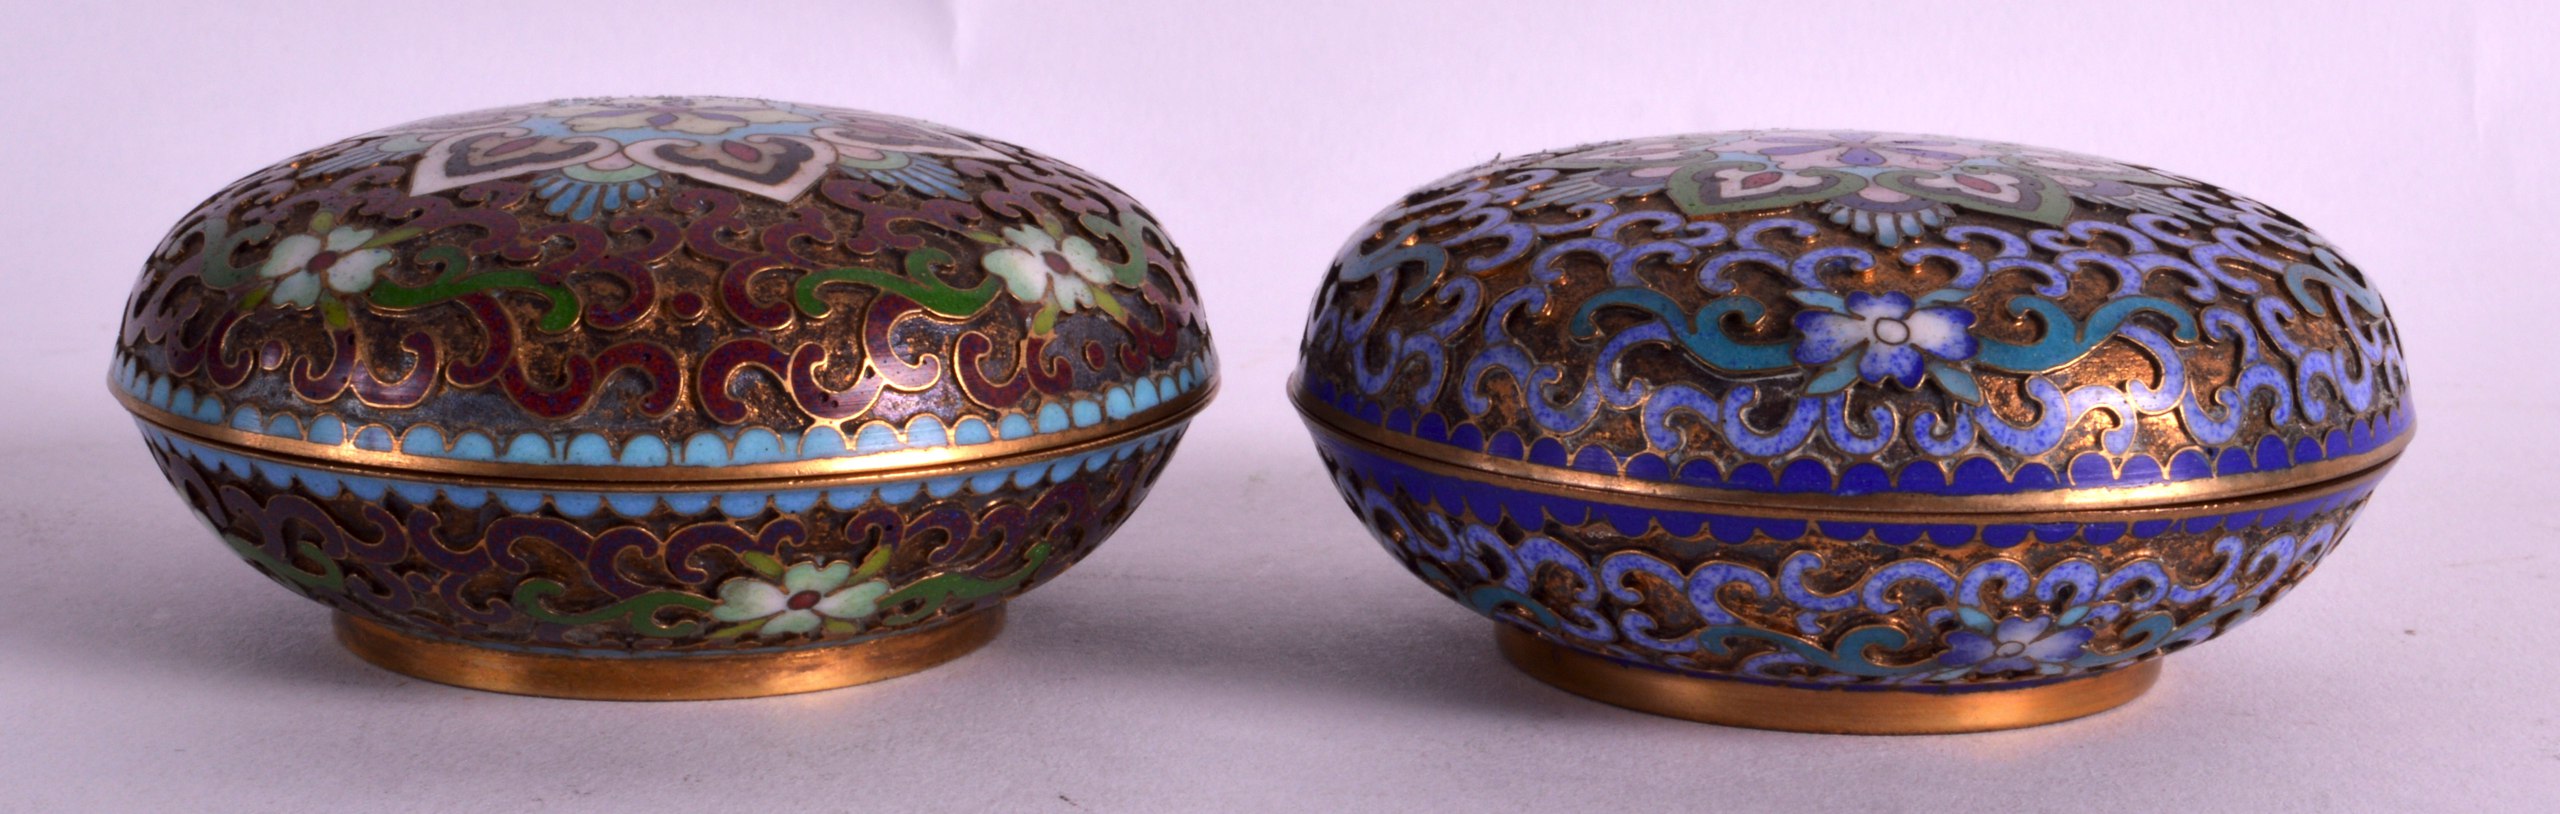 A PAIR OF EARLY 20TH CENTURY CHINESE CLOISONNE ENAMEL BOXES AND COVERS decorated with flowers. 3.